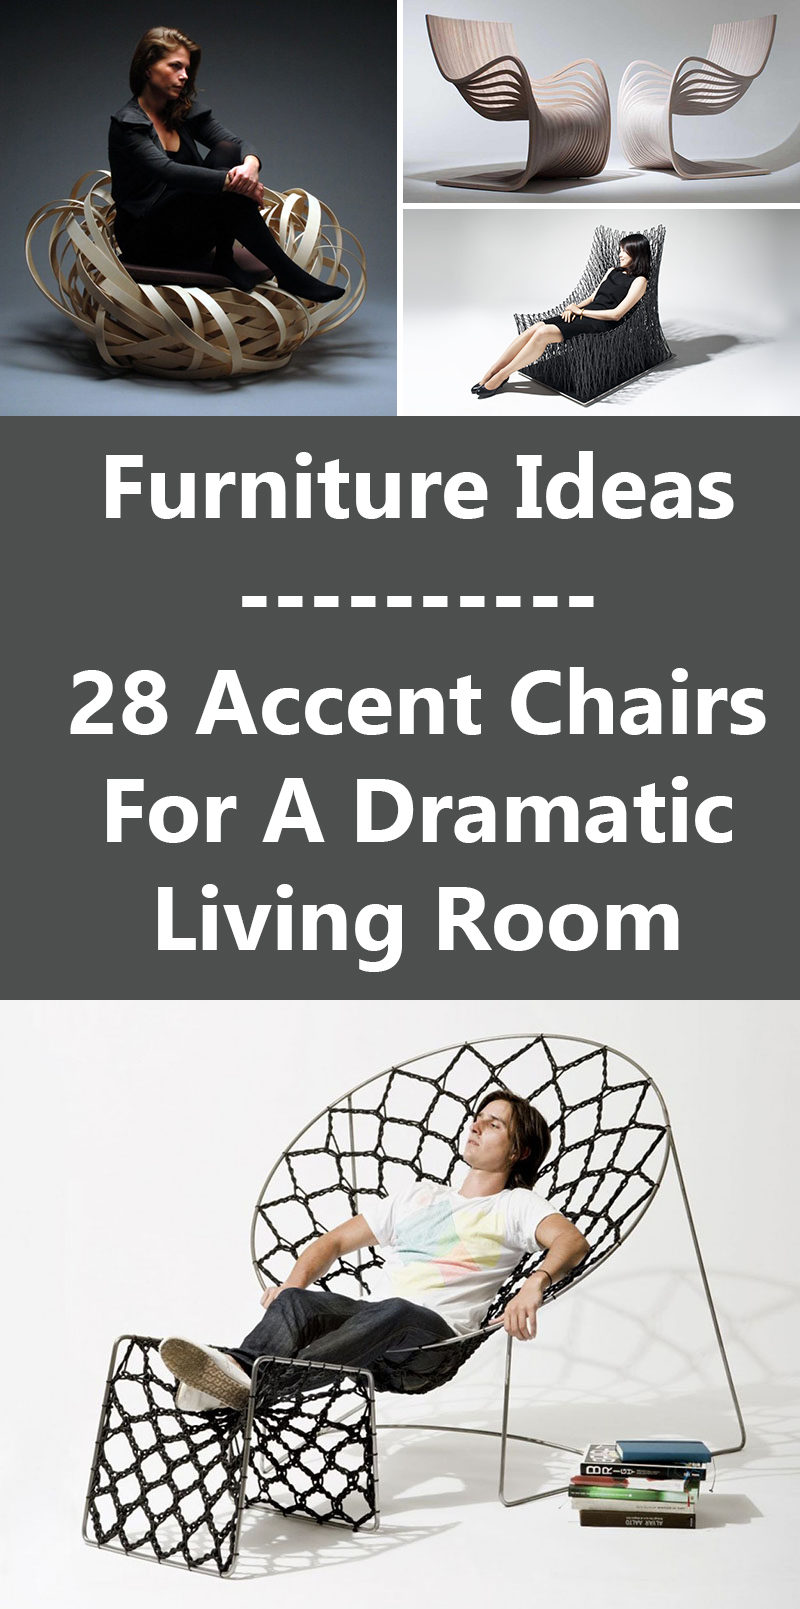 Furniture Ideas - 28 Accent Chairs For A Dramatic Living Room